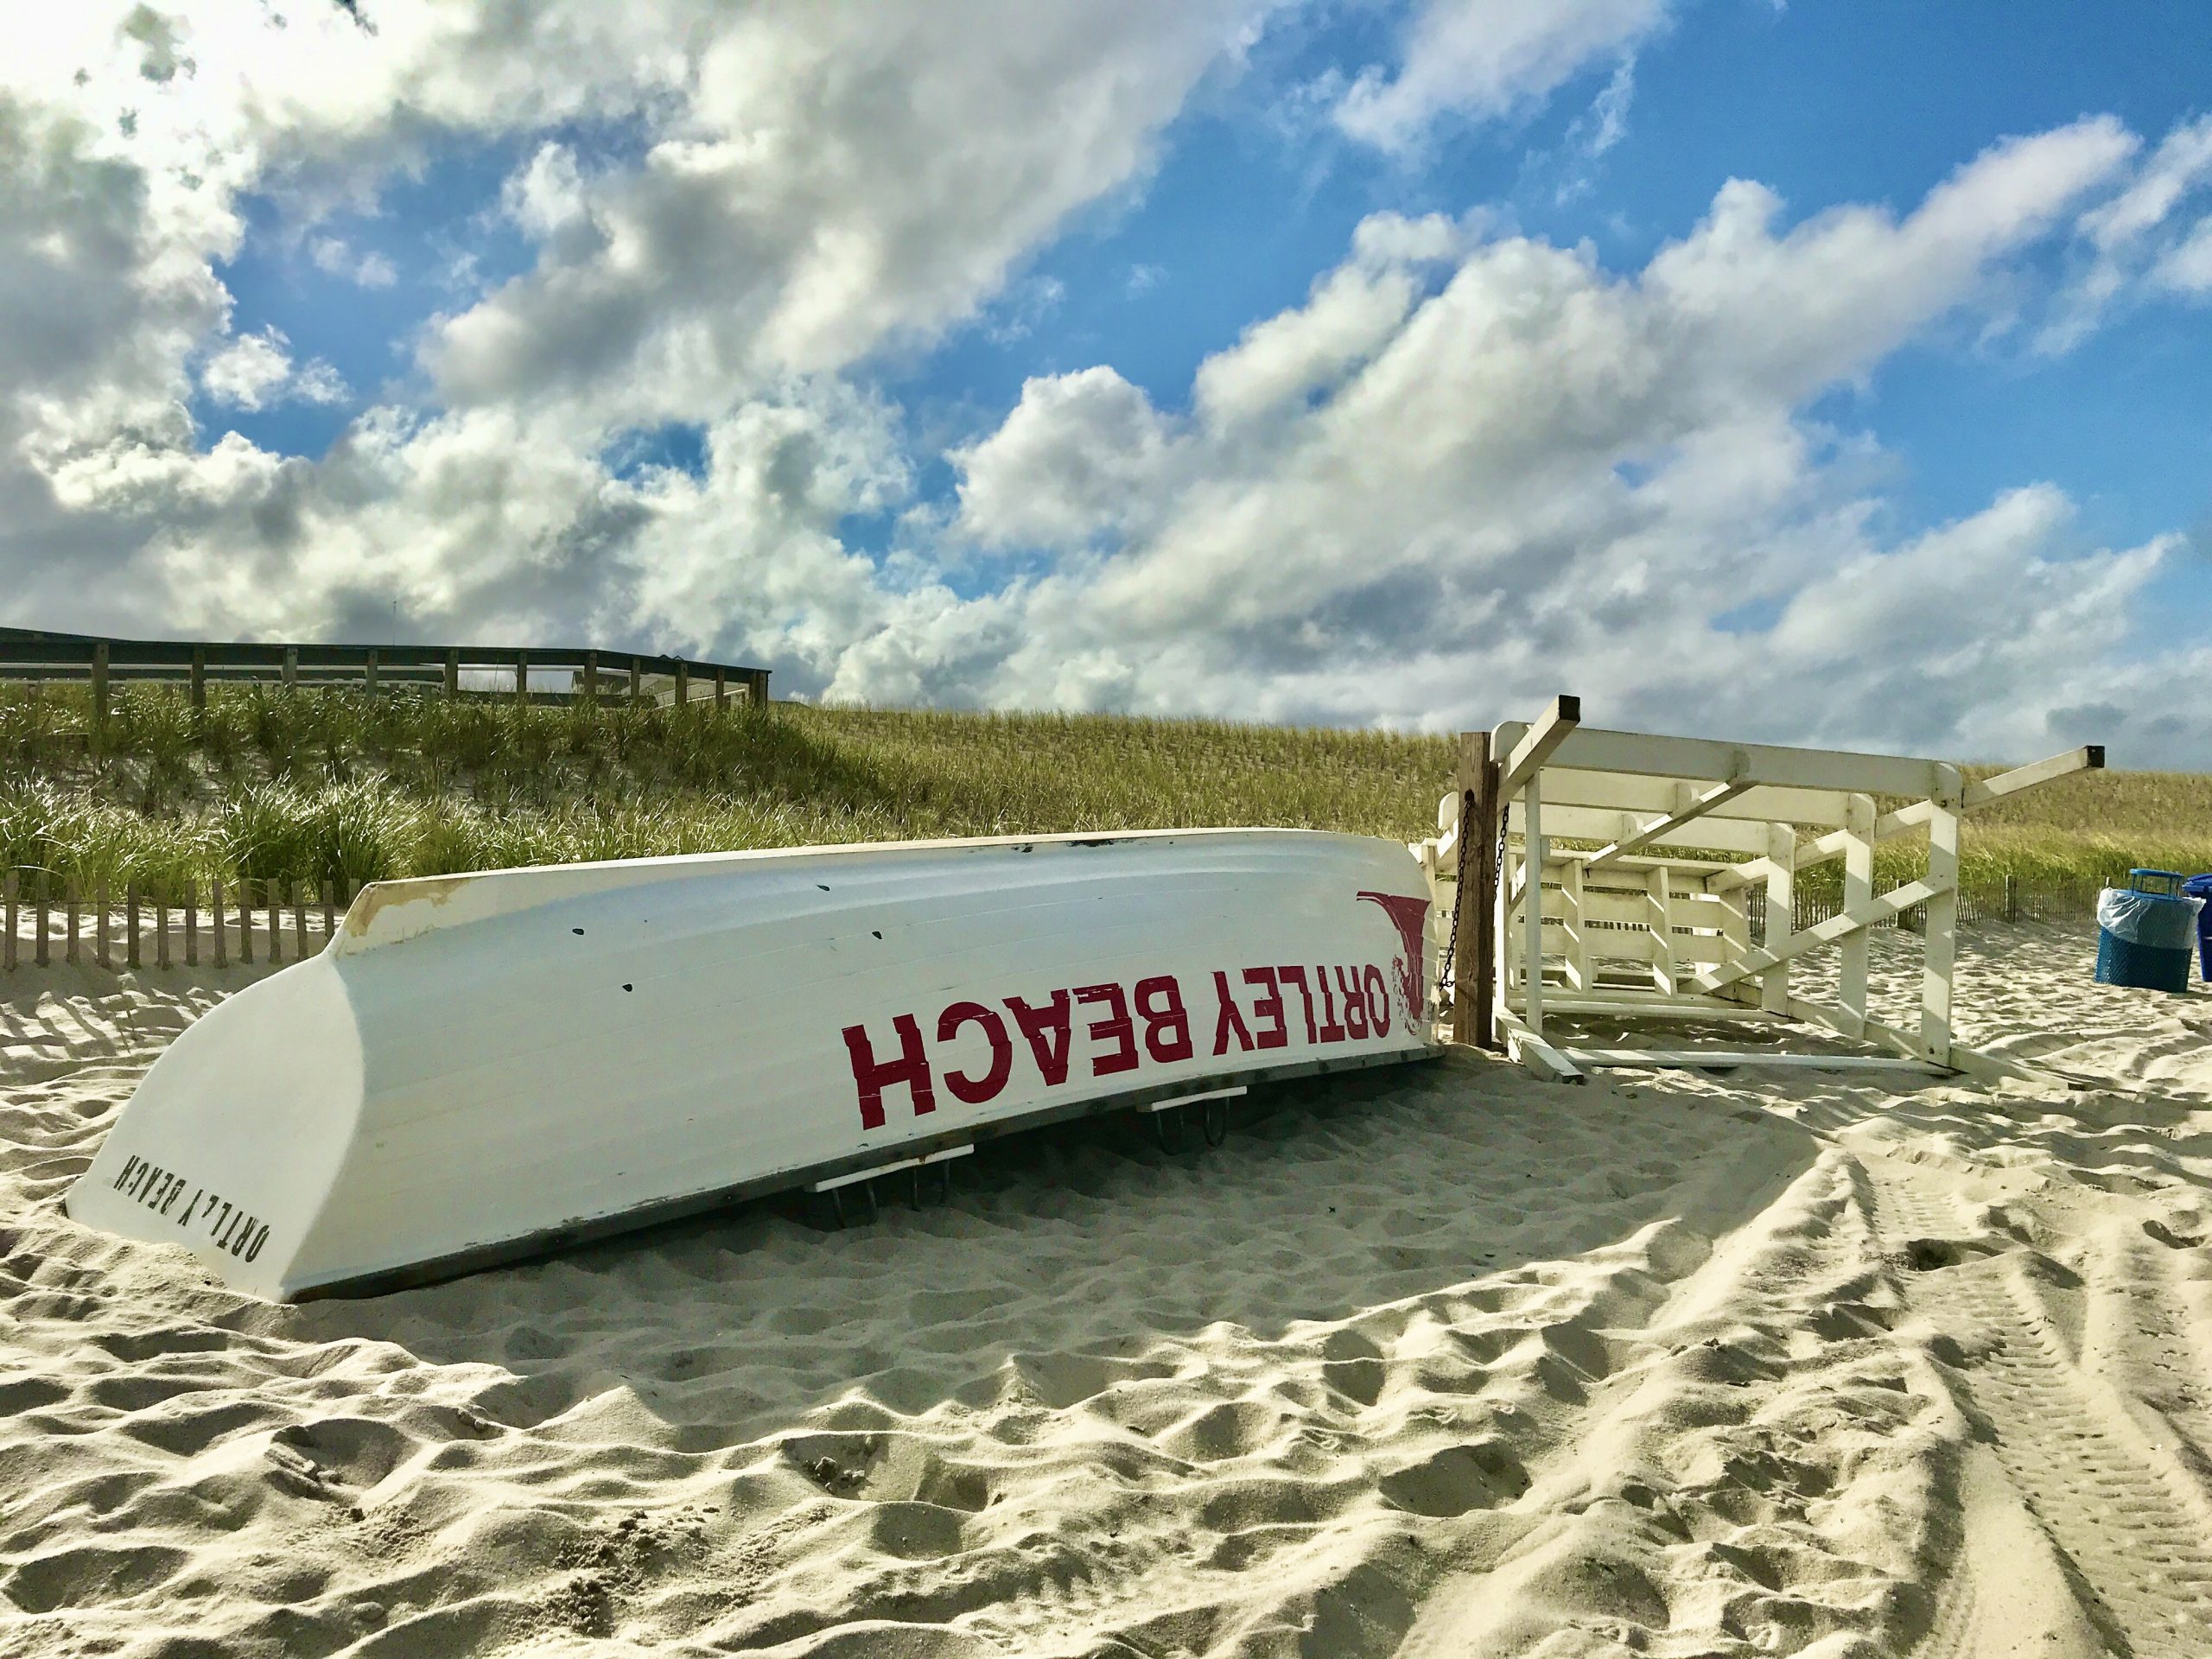 An Ortley Beach lifeguard chair and rescue boat. (Photo: Daniel Nee)